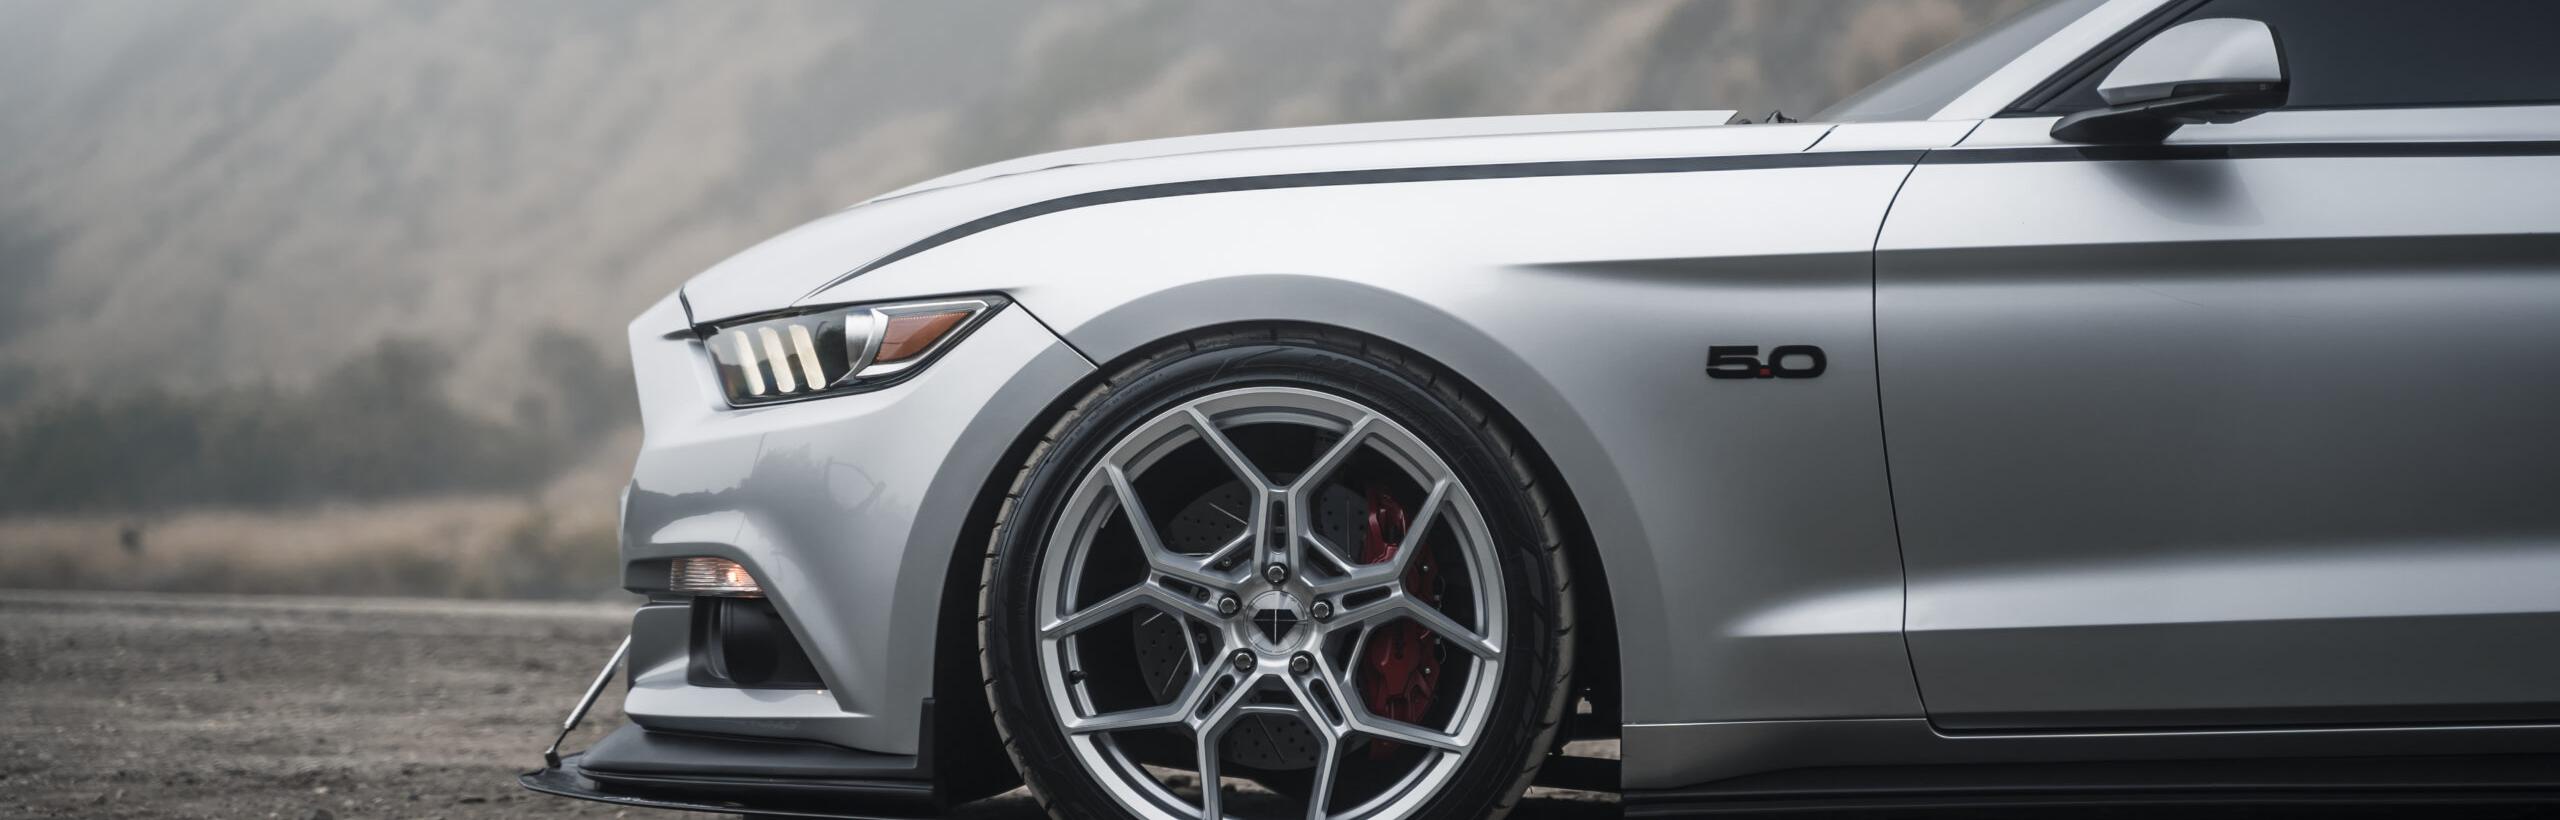 header image of a silver sports car with custom rims